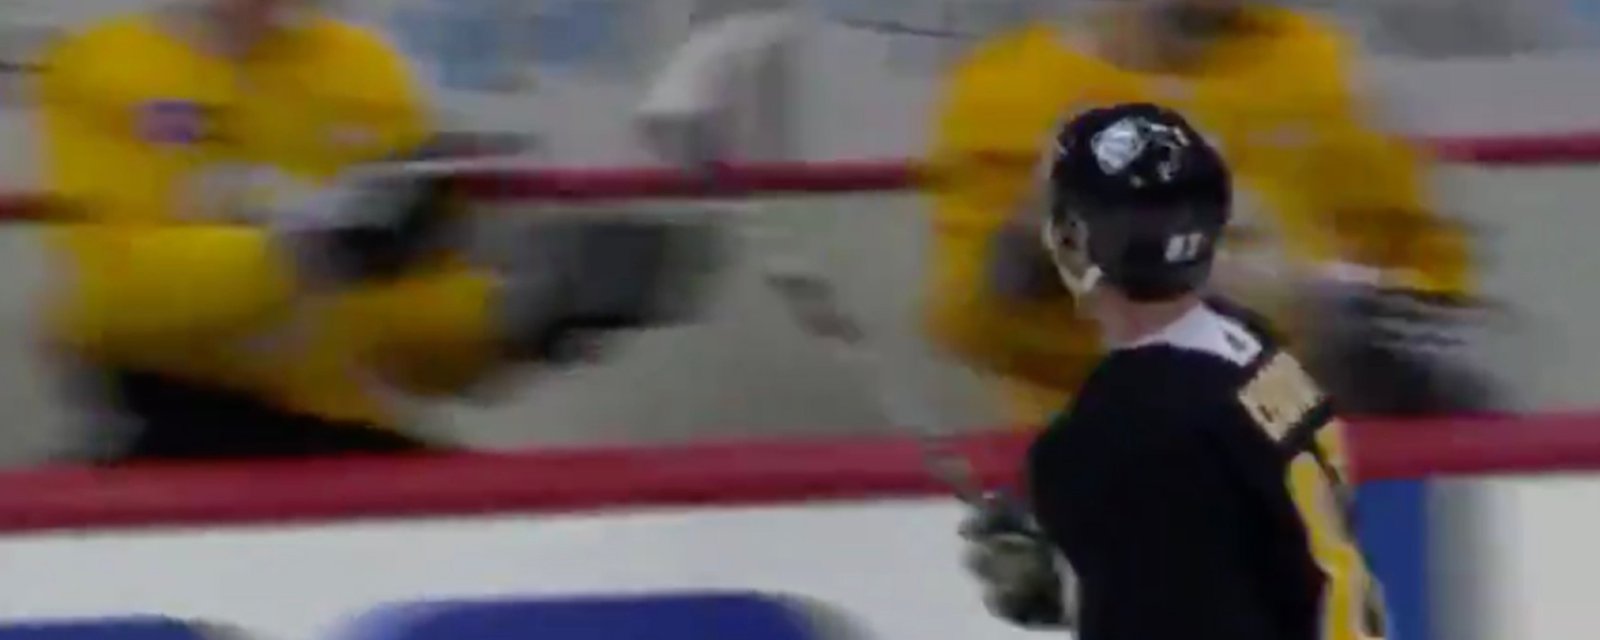 Sidney Crosby steals opponent’s stick and scores unbelievable goal after breaking his